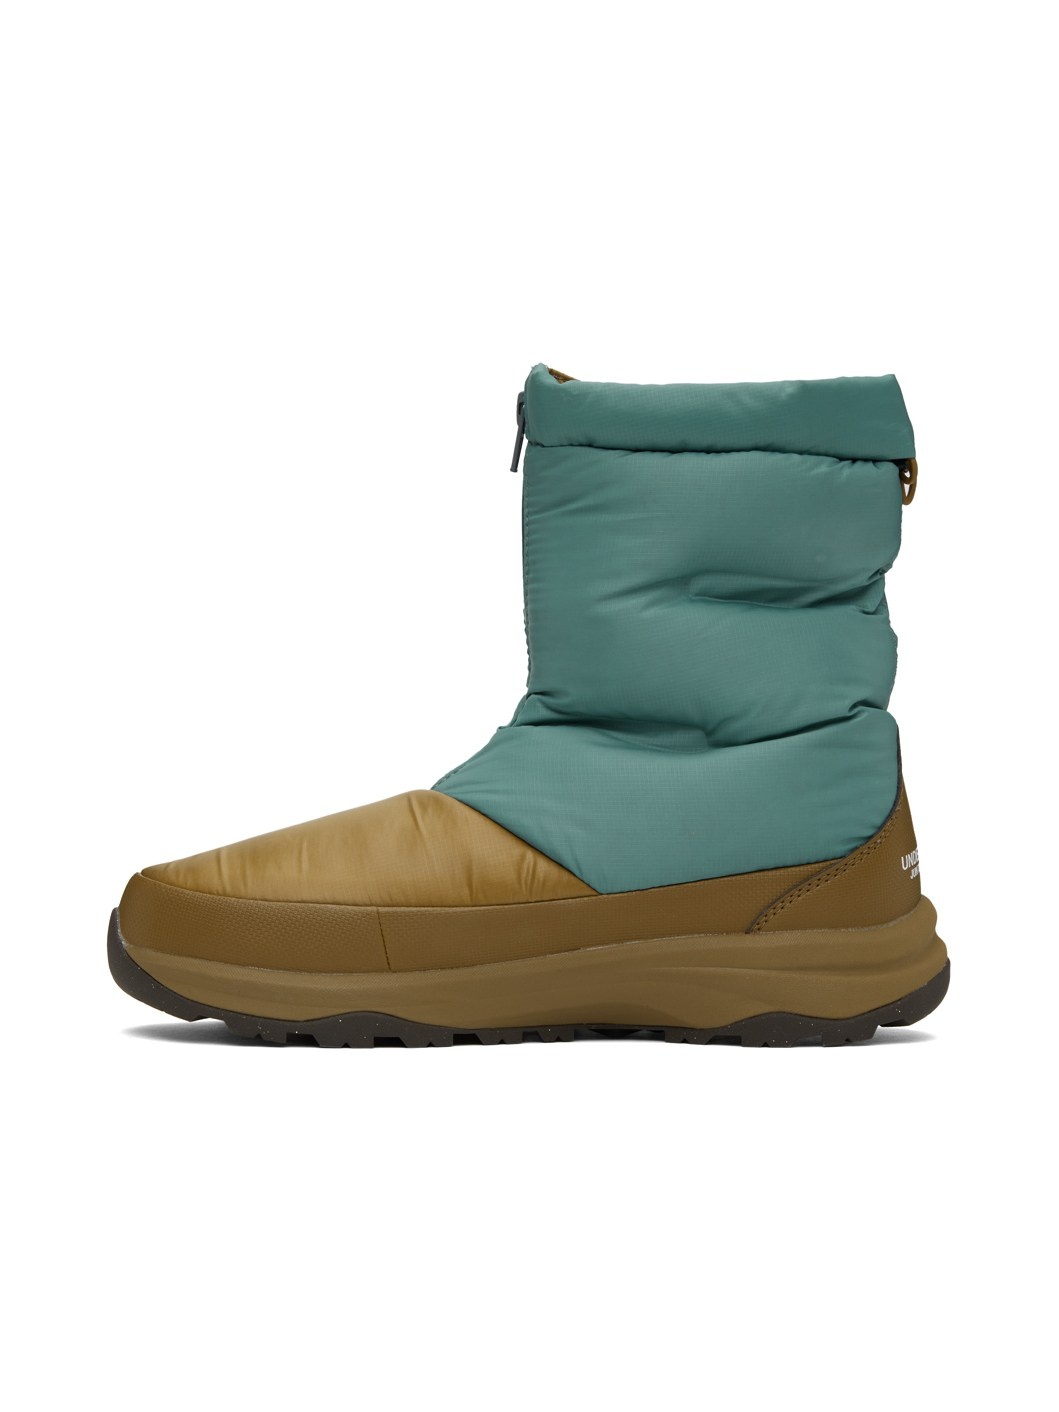 Green & Beige The North Face Edition Soukuu Nuptse Boots - 3